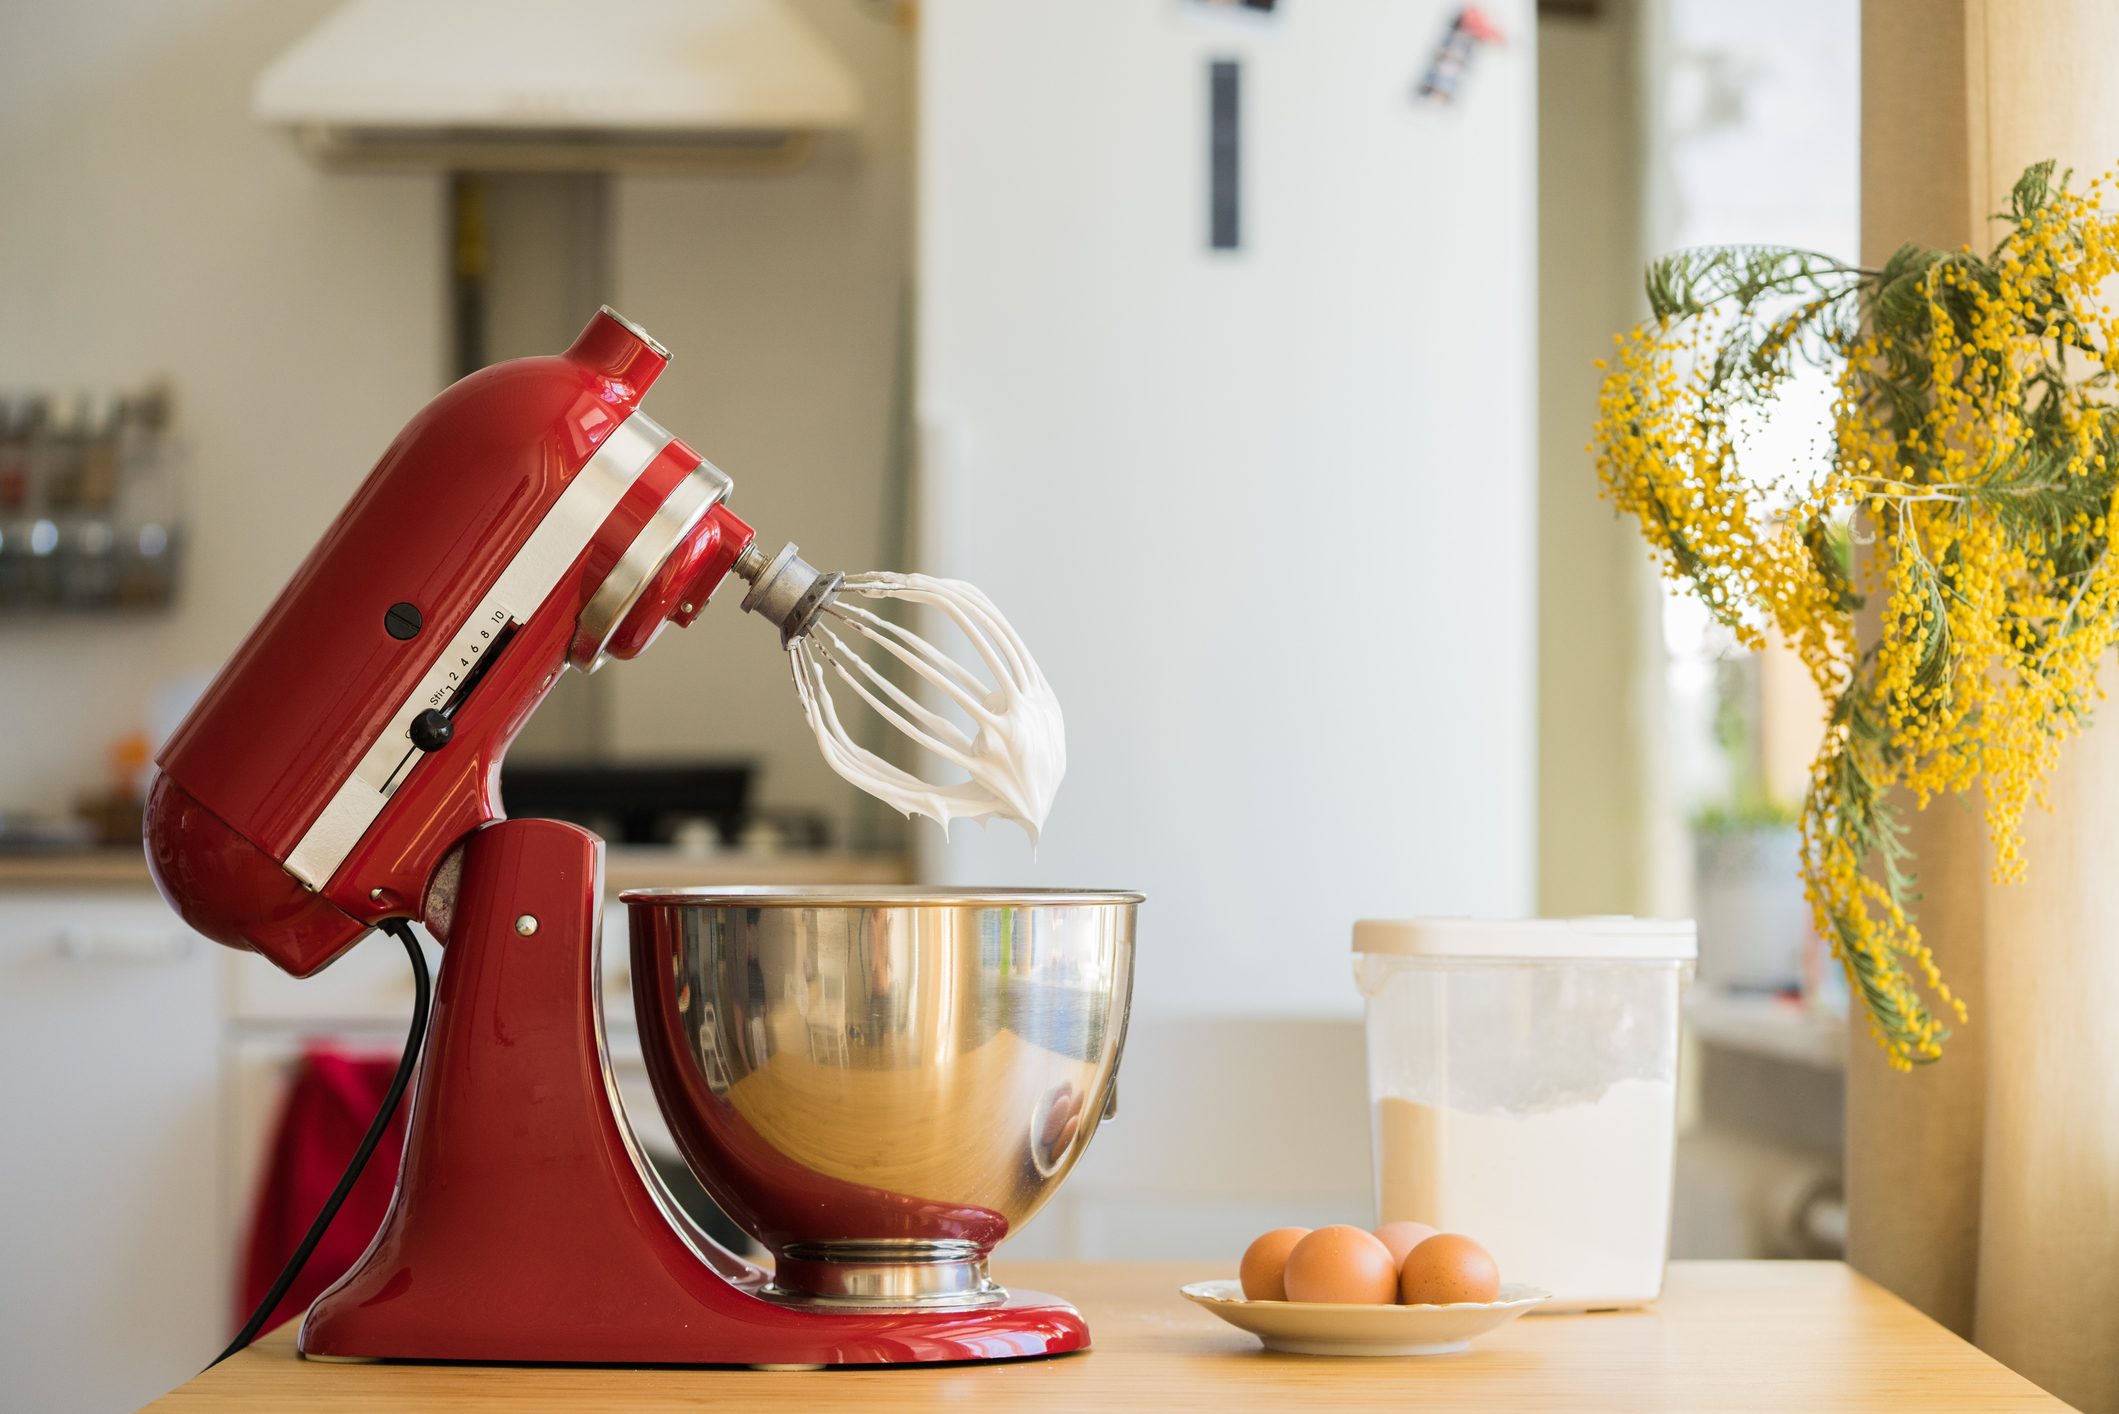 How Heavy Is A Kitchenaid Stand Mixer